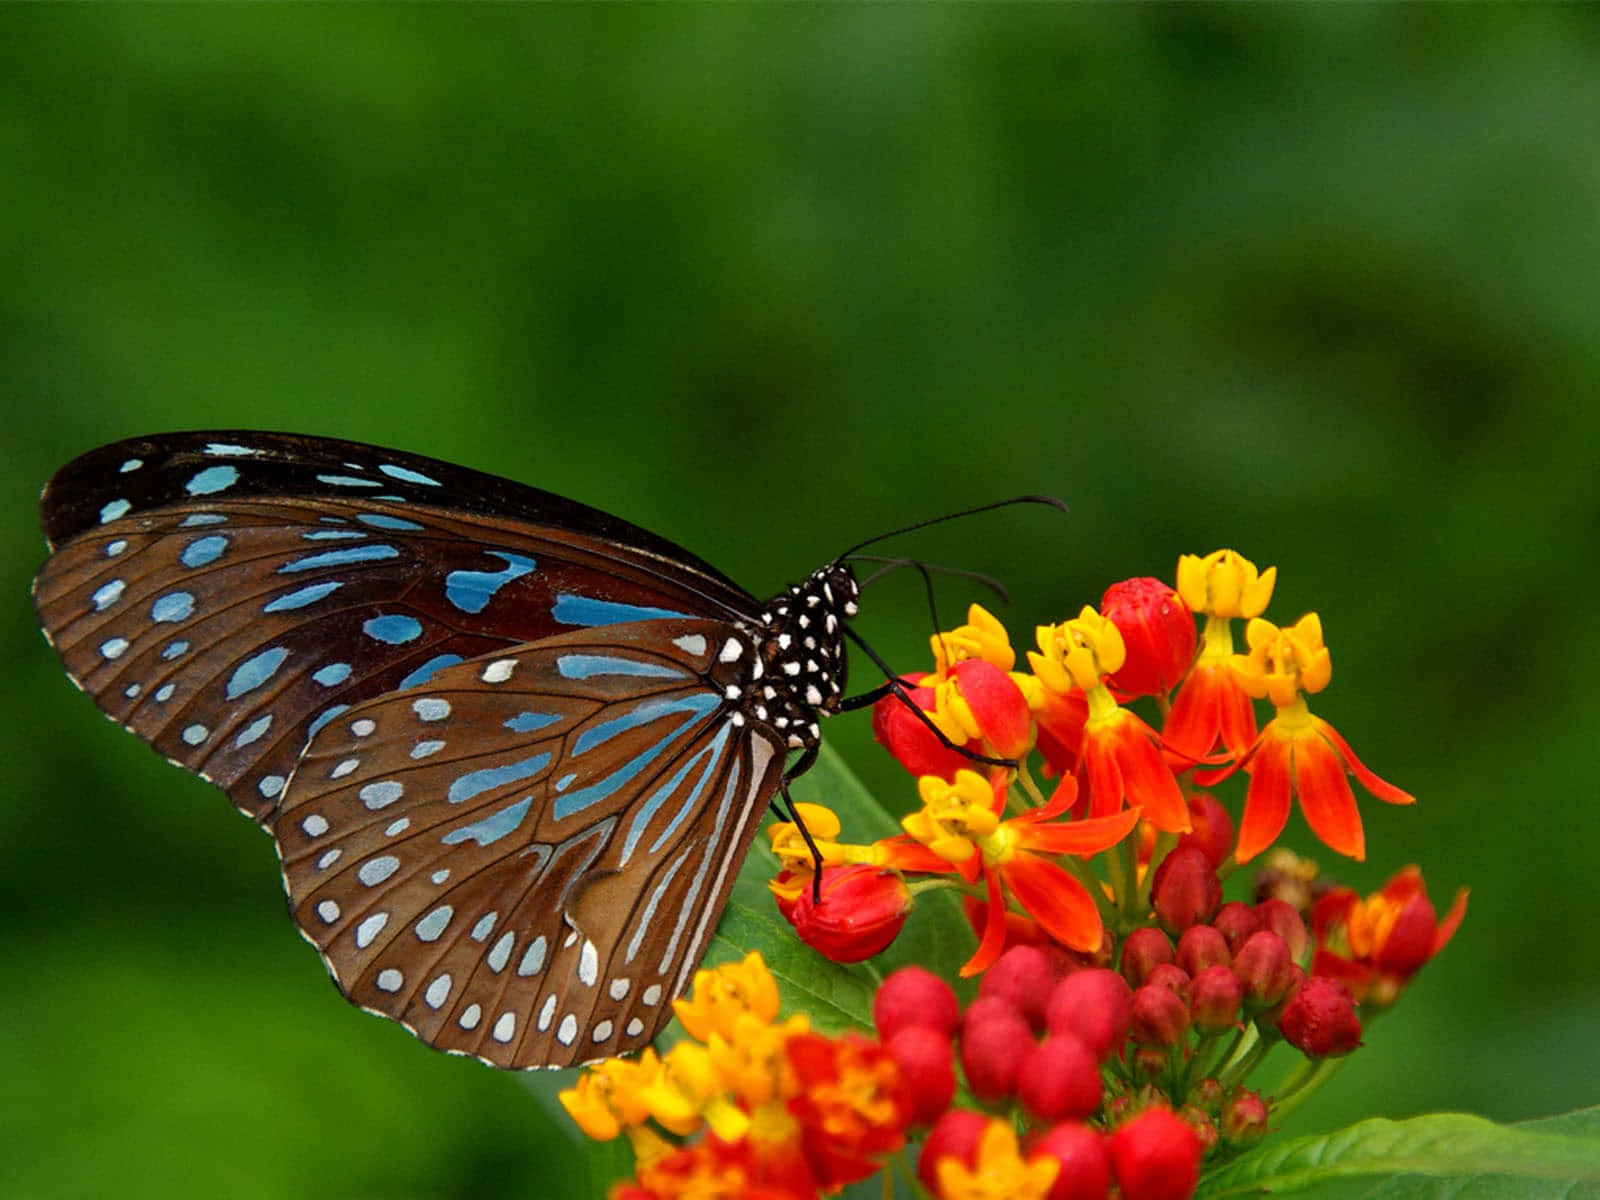 "Beauty and Variety of the Amazing Butterfly Species" Wallpaper